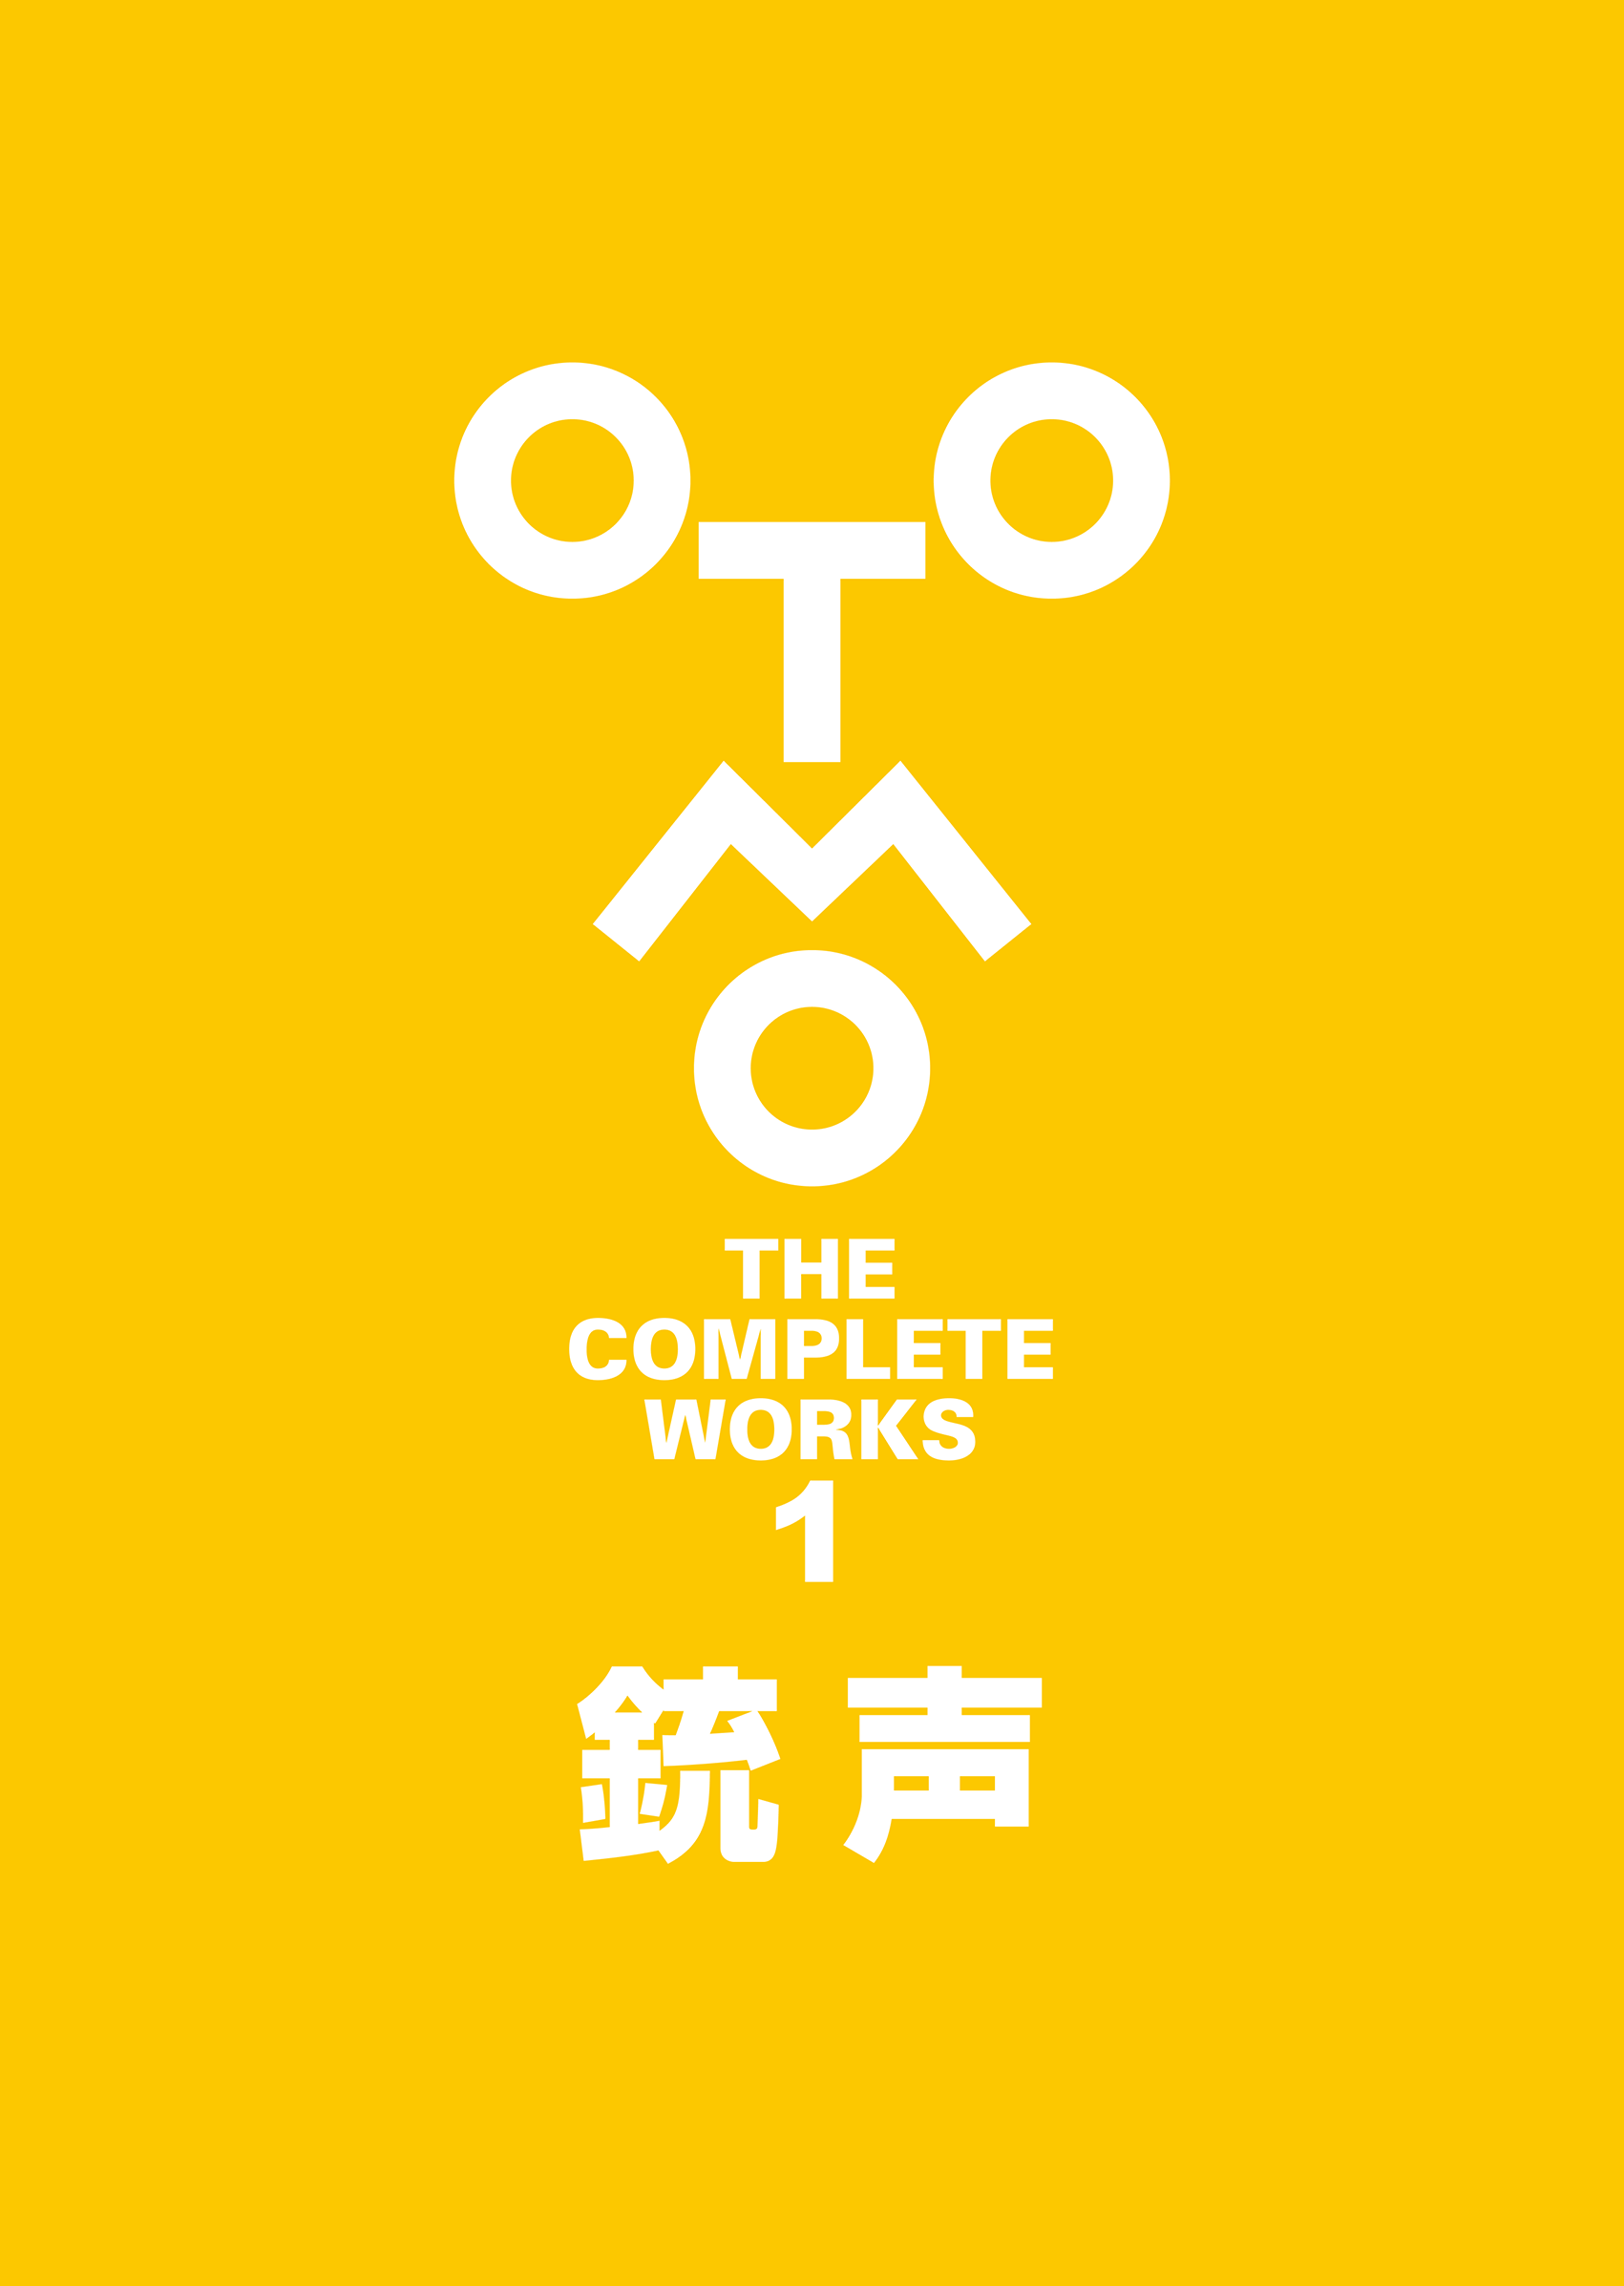 OTOMO THE COMPLETE WORKS 1 [銃声]